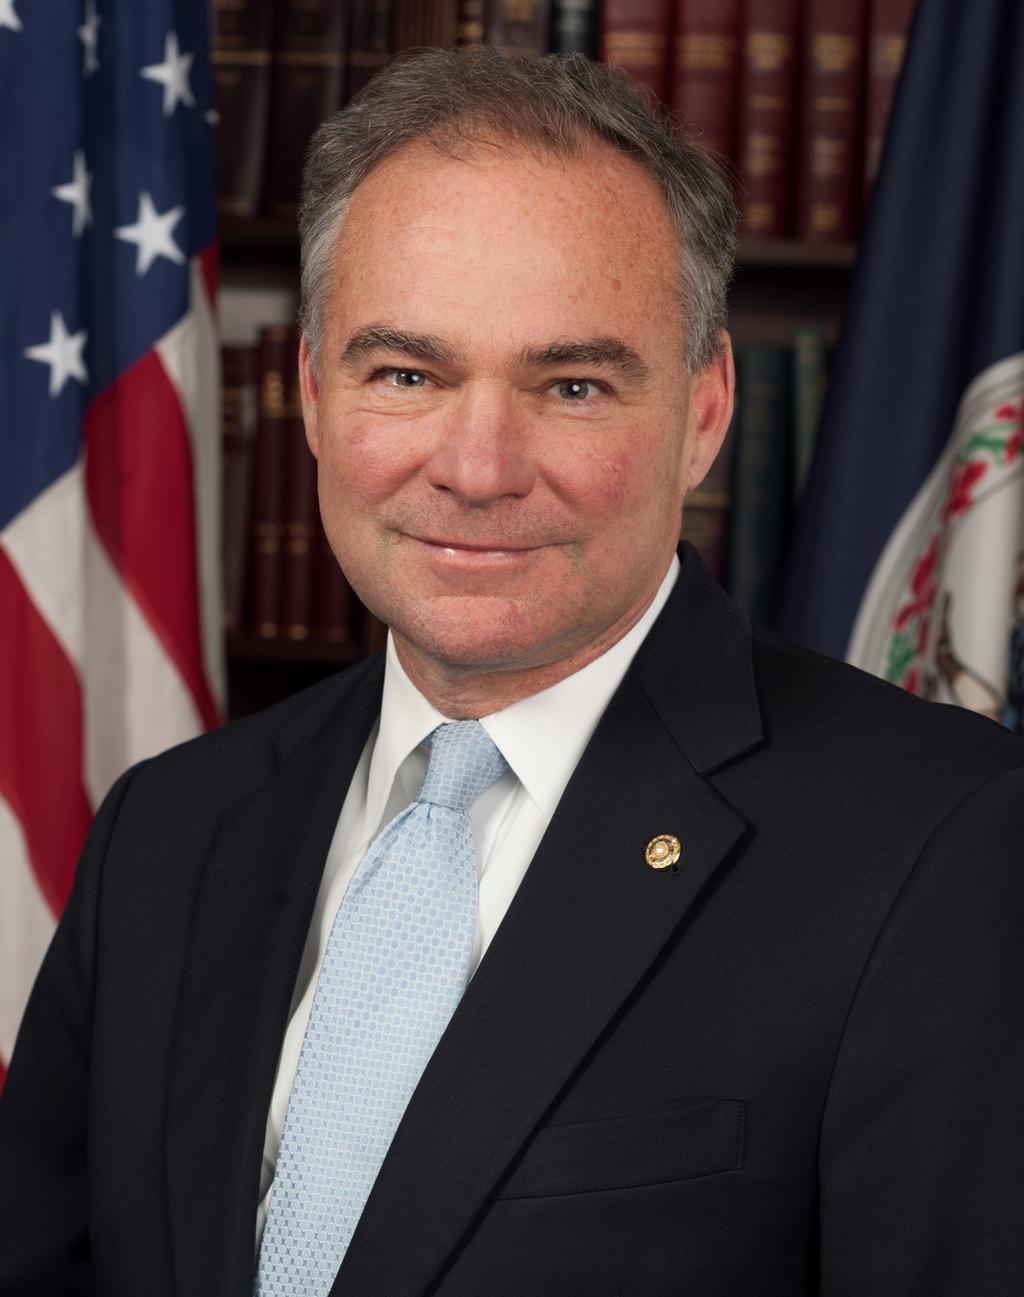 U.S. Senate Timothy M. Kaine (D) Supports DACA and amnesty for people who entered the country illegally. Supports the Dream Act.